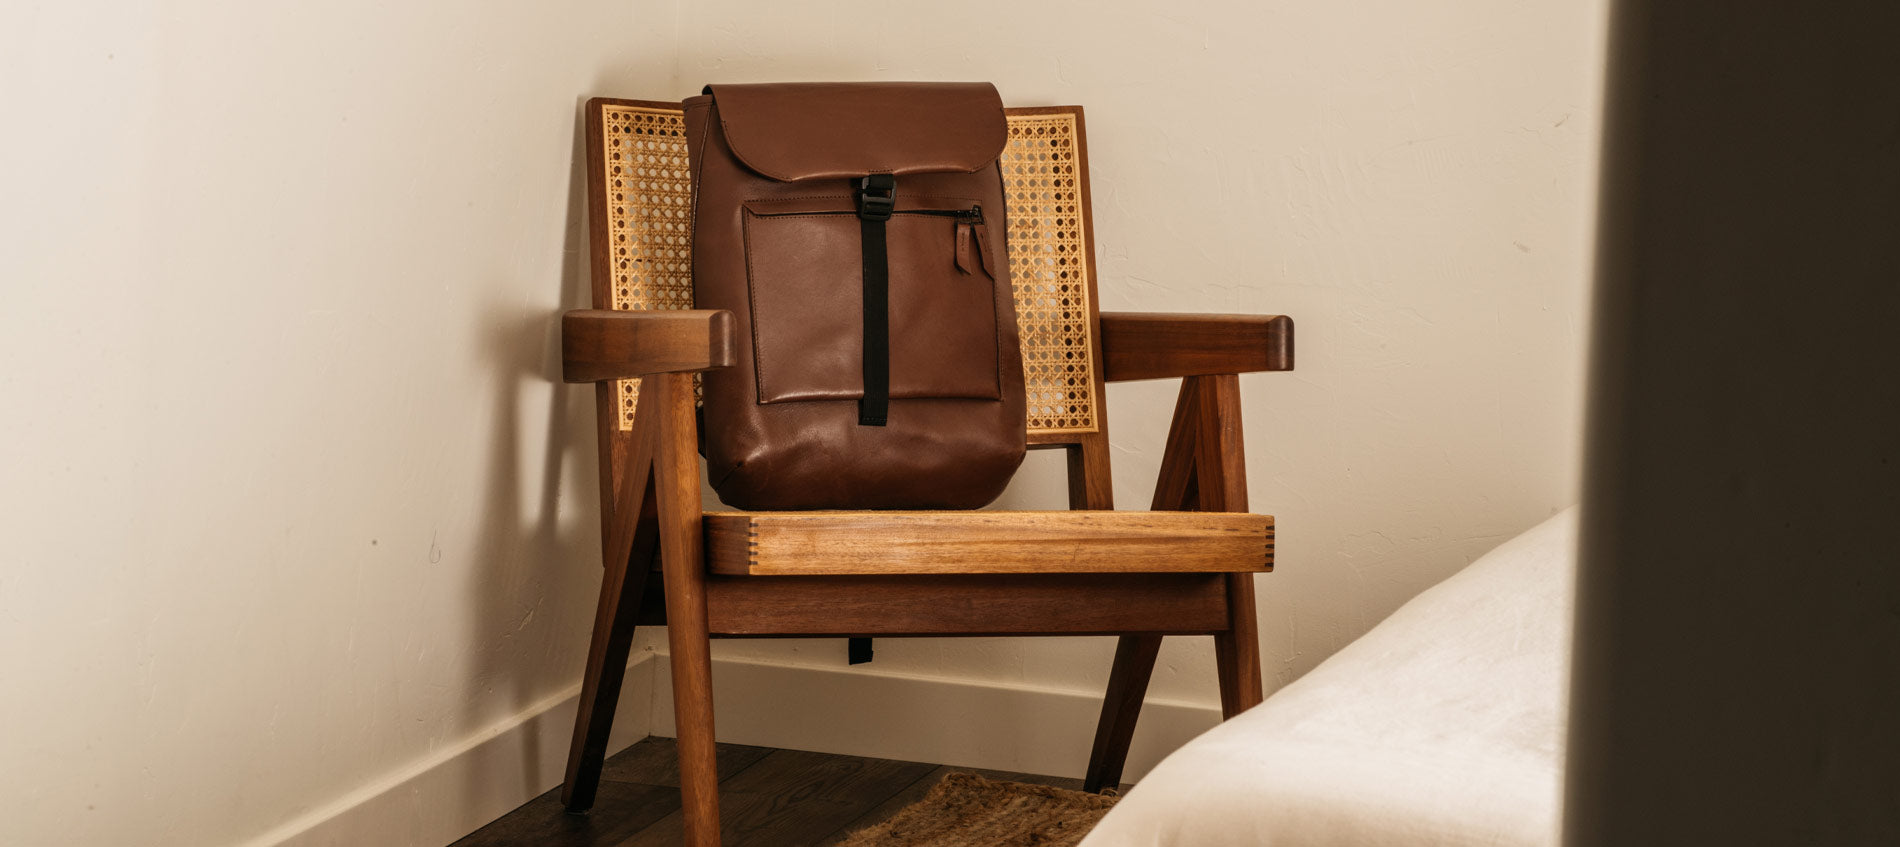 An all leather backpack resting on a wooden chair in a bedroom.